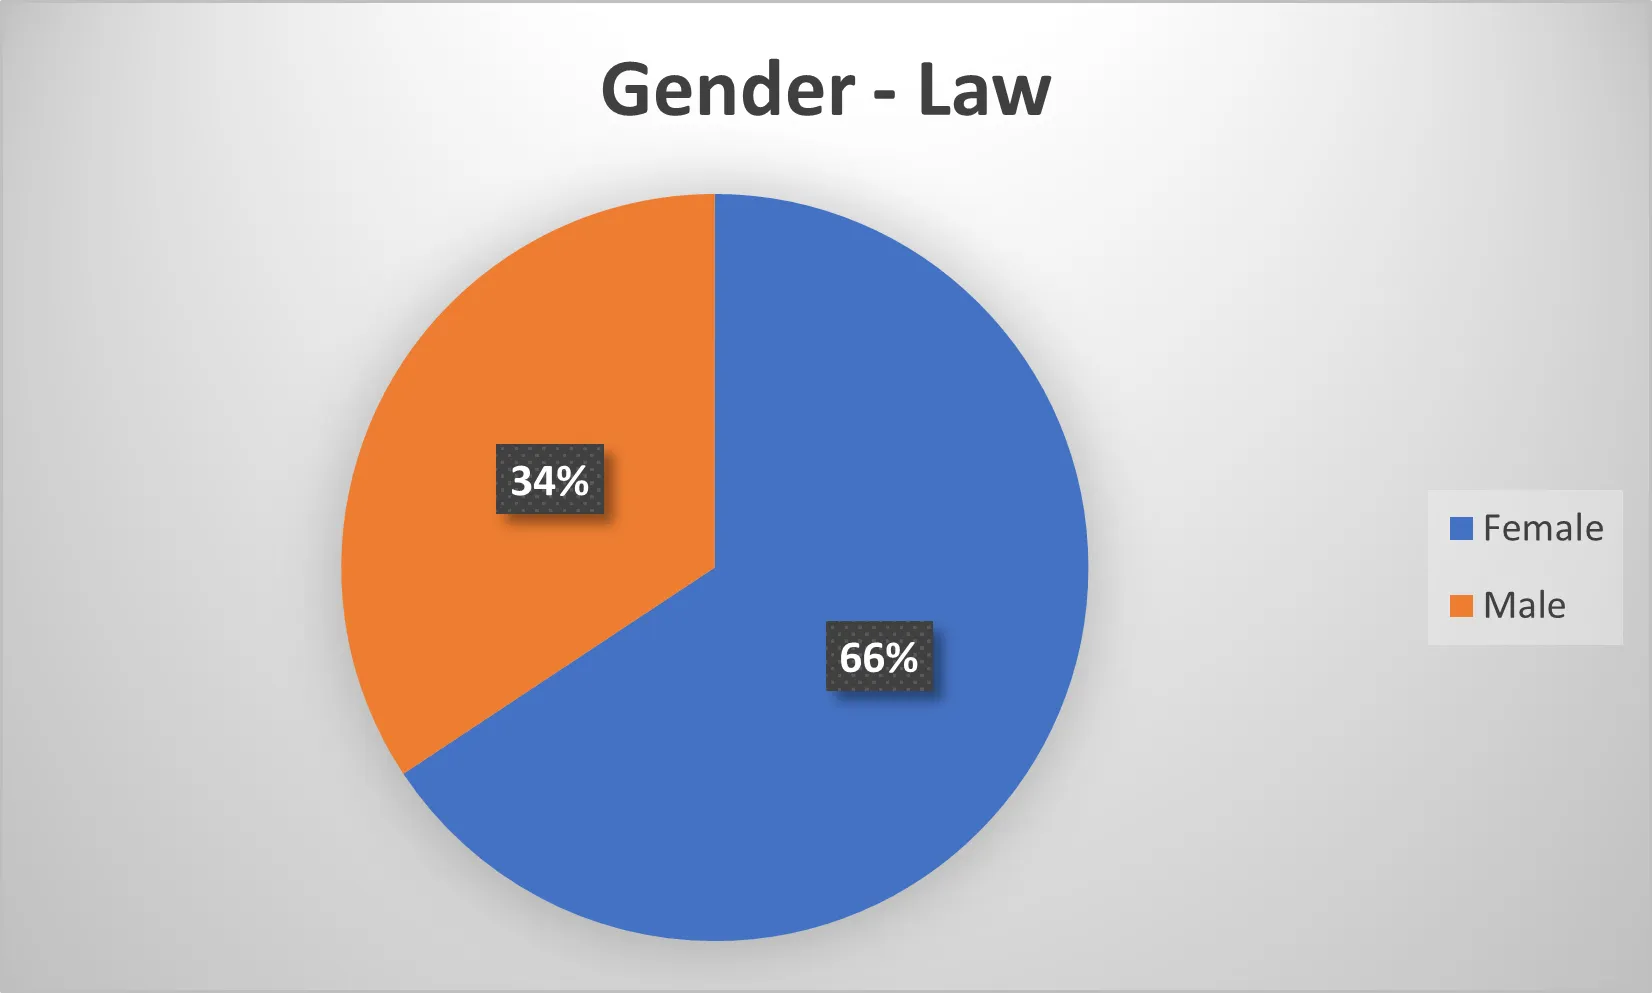 Non-binary Gender is c. 1% at all festivals which is negligible in this chart 